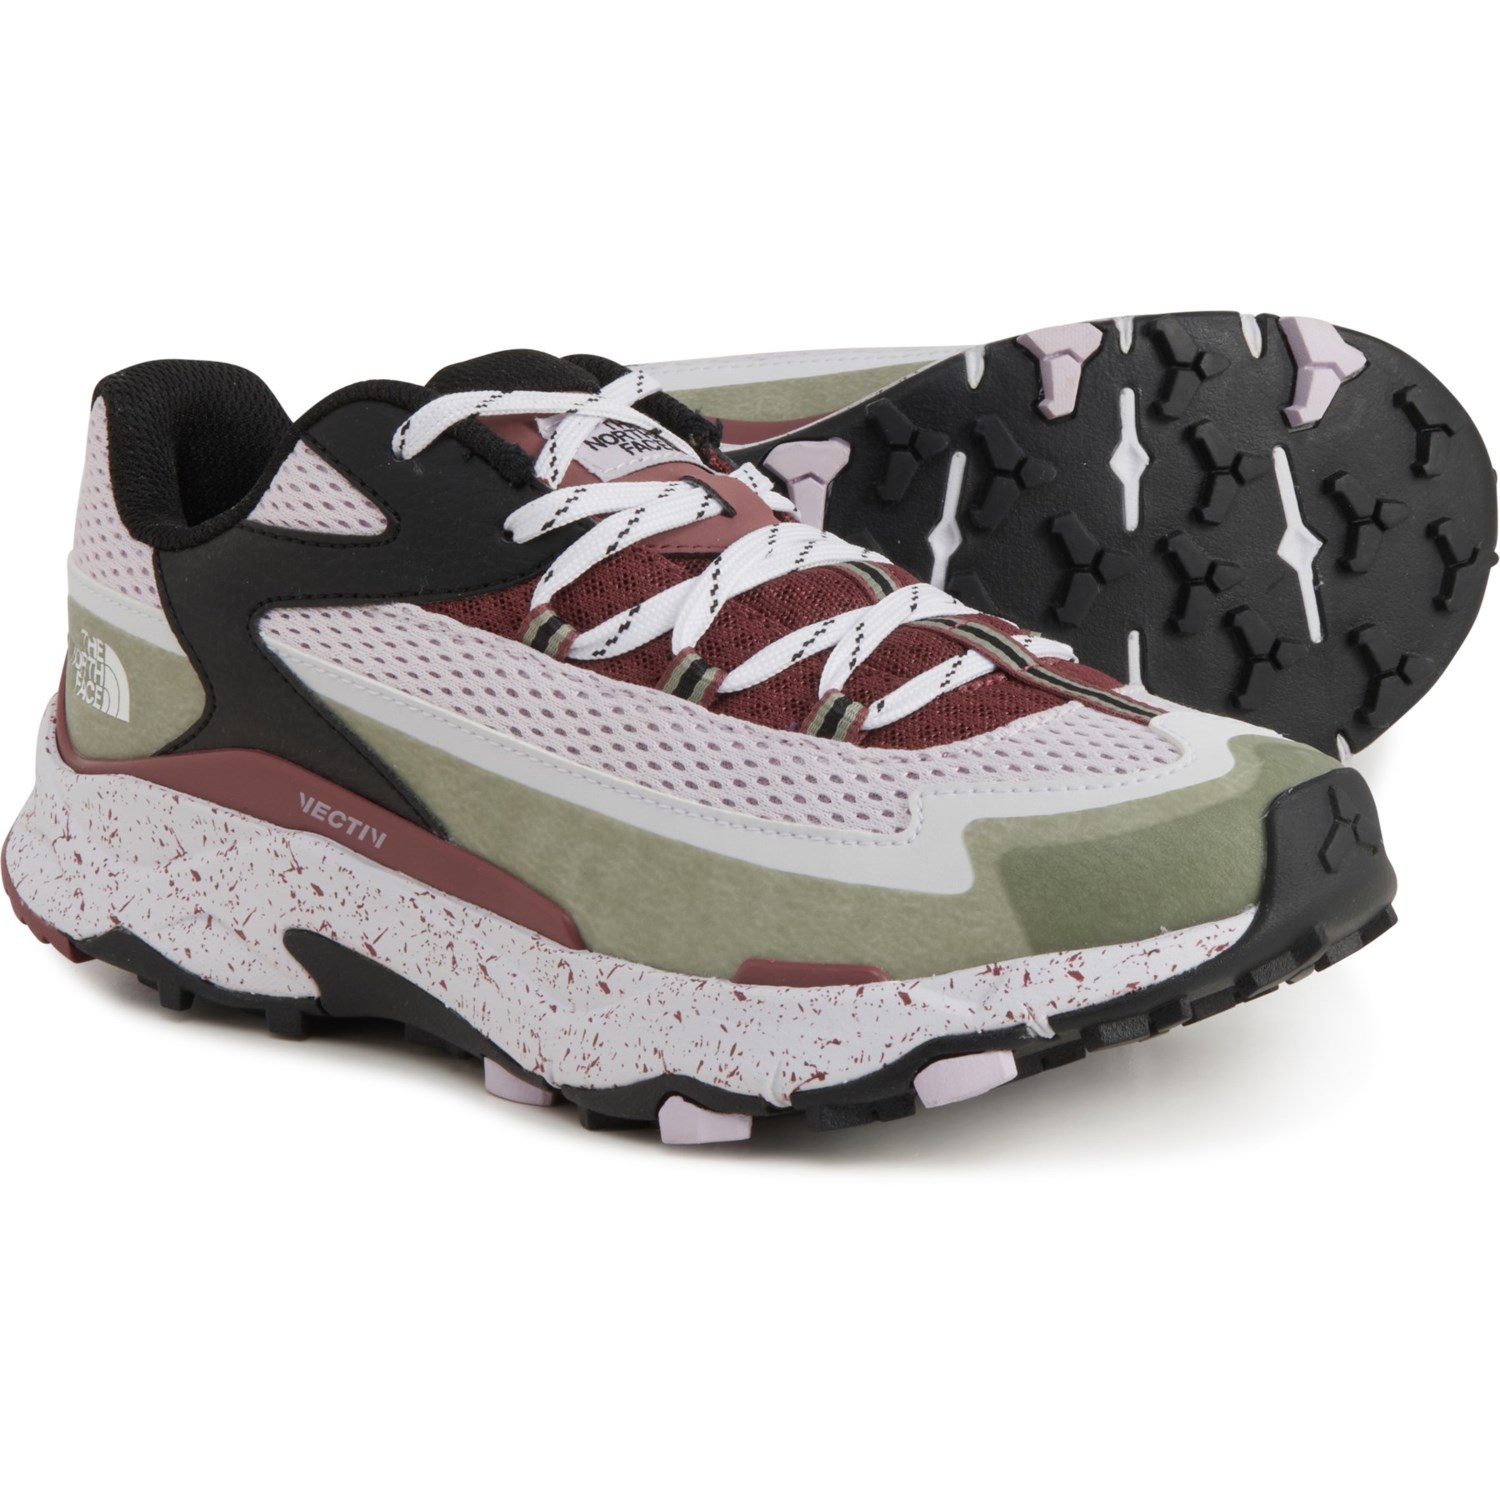 The North Face VECTIV Taraval Trail Running Shoes (For Women)